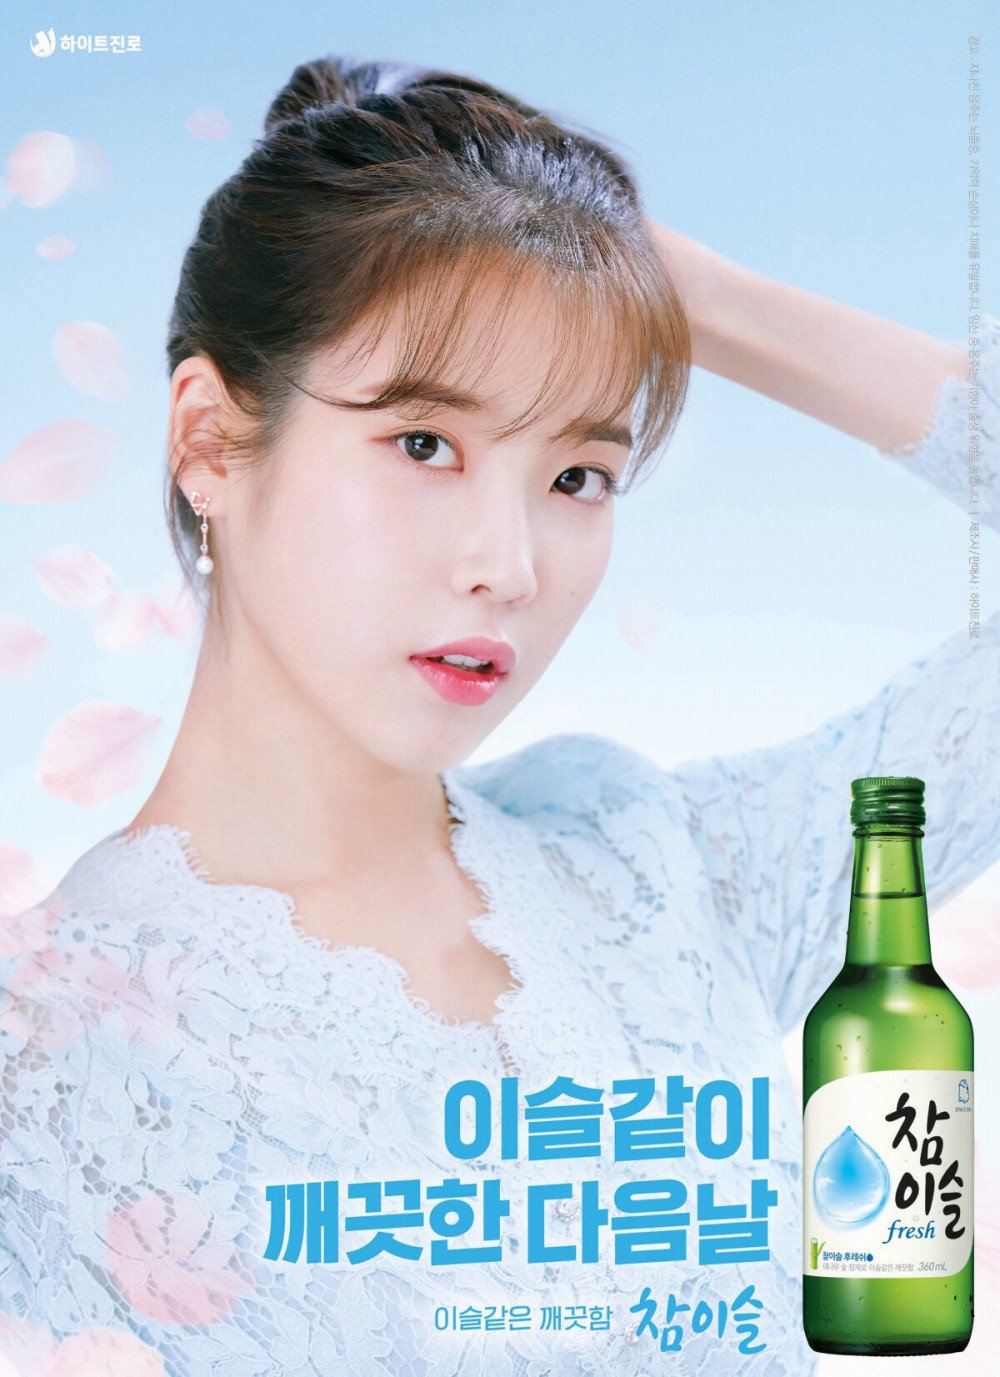 IU returns as the face of 'Chamiseul' soju, the first time a ...